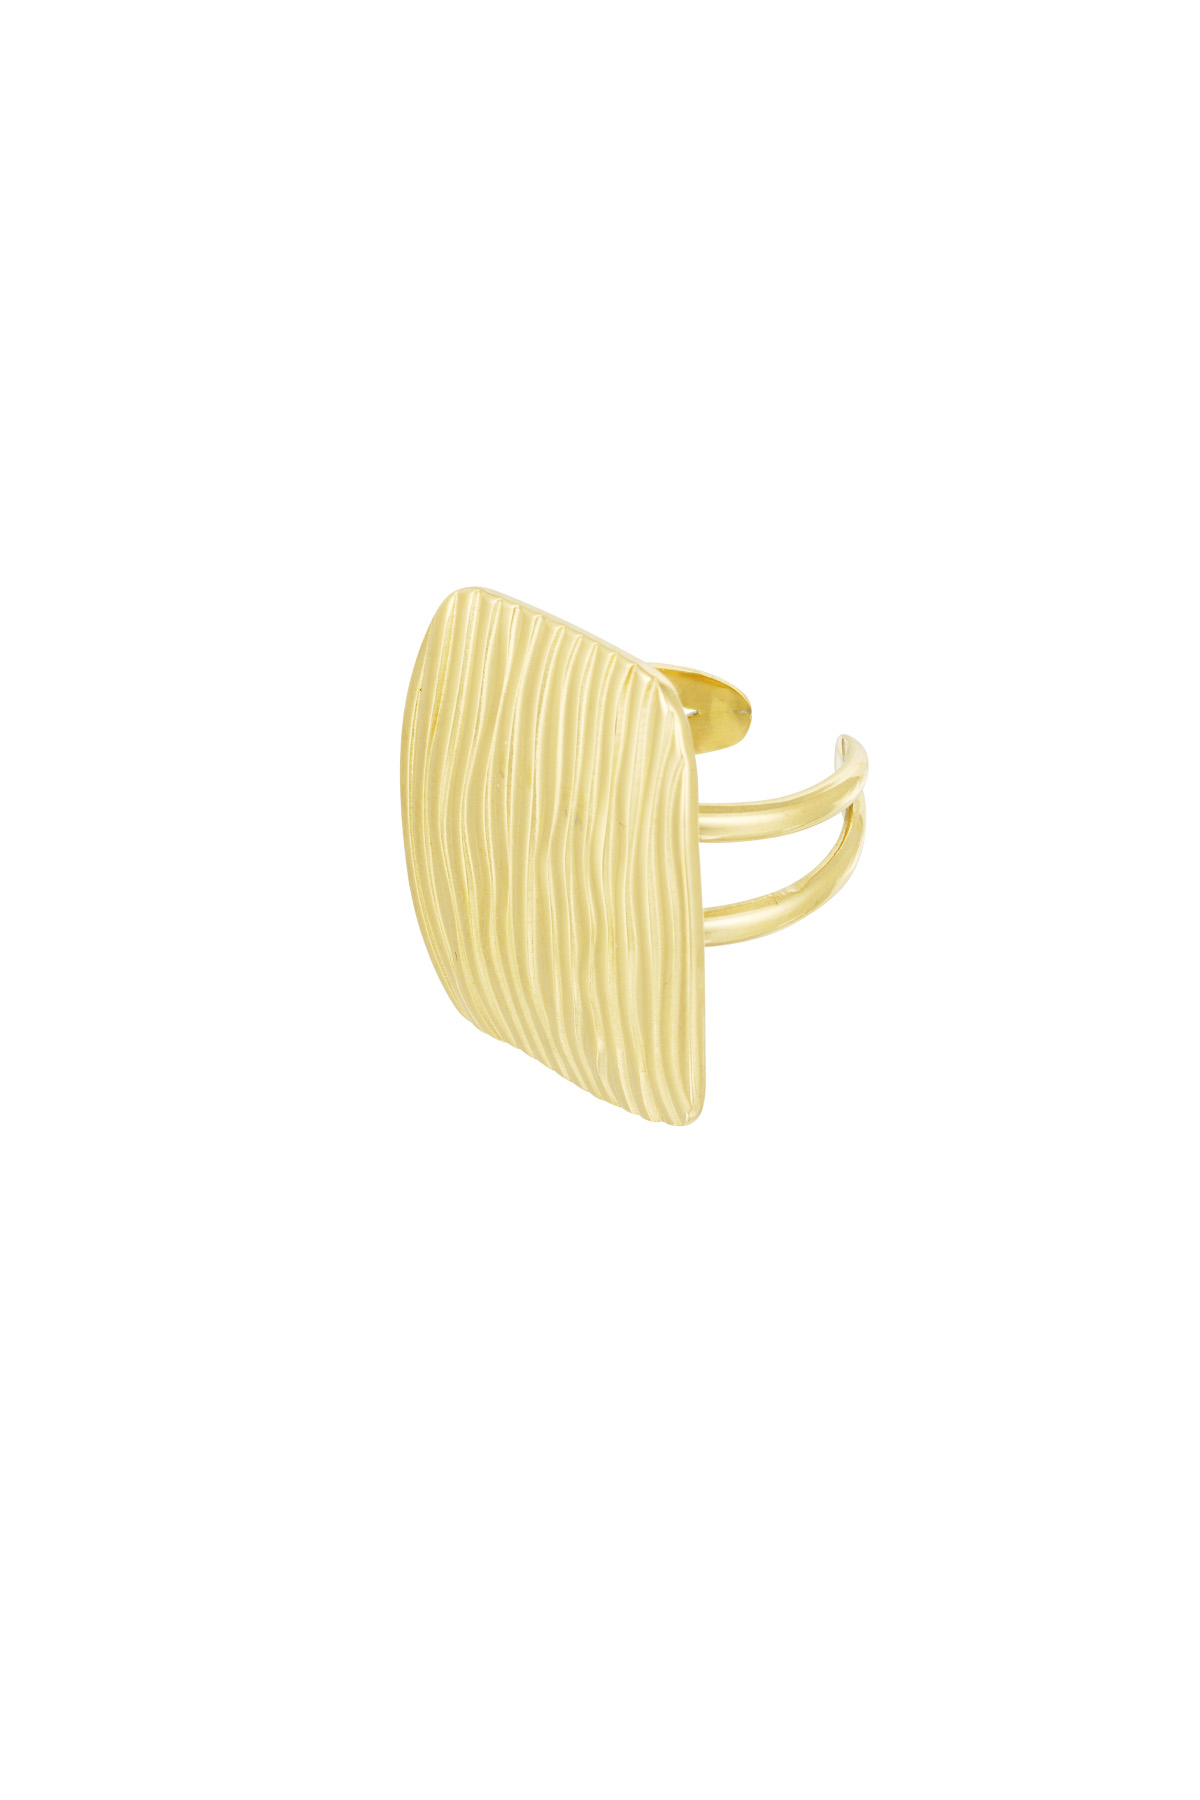 Structured square ring - gold  h5 